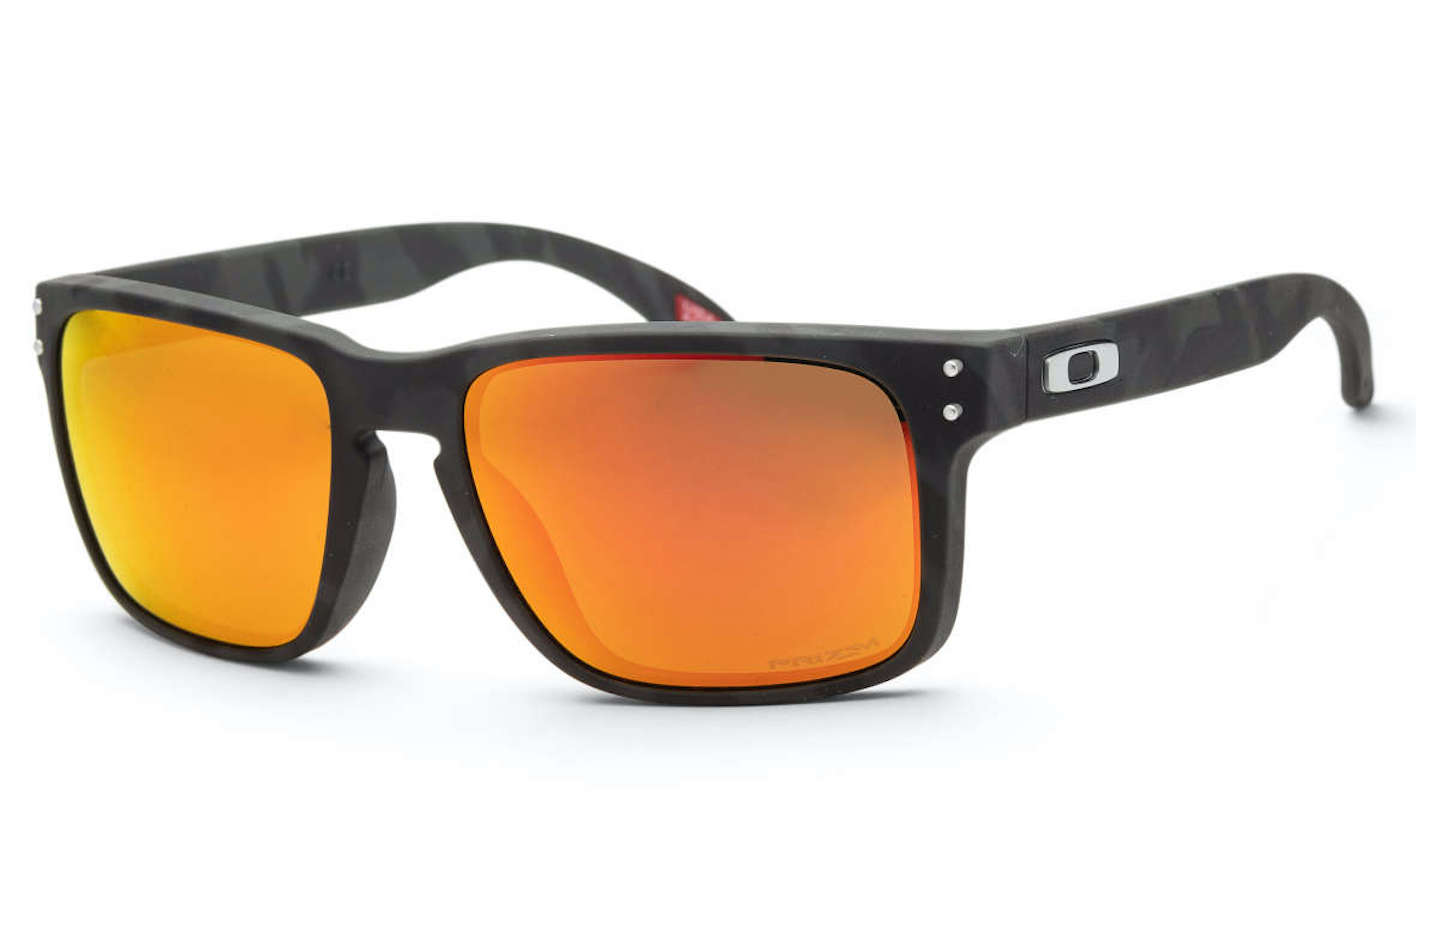 Save more than $50 on sunglasses from Oakley and Ray-Ban at Ashford